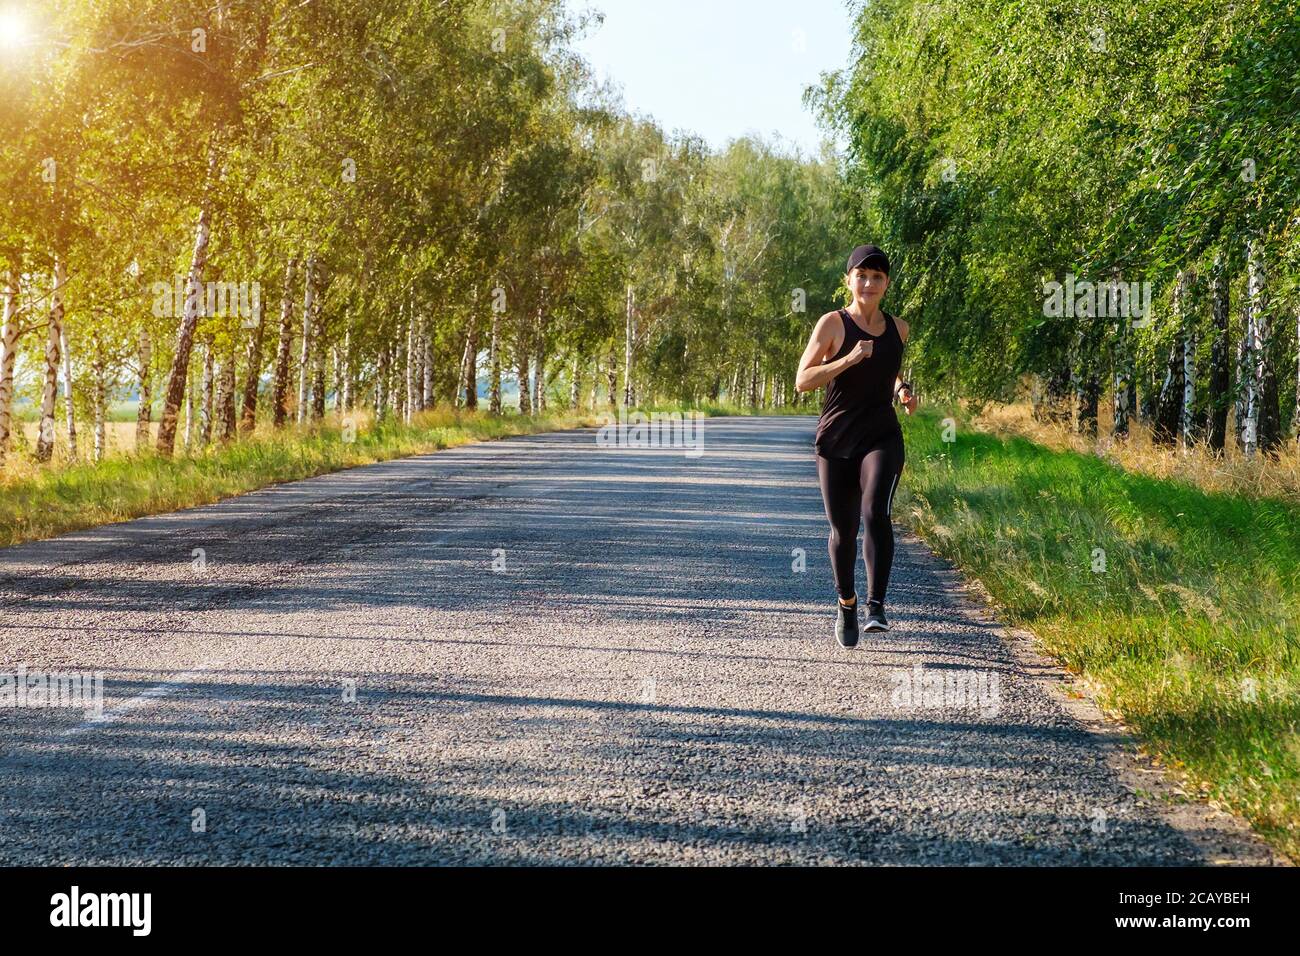 Young Fit Beautiful Girl Running Outdoor On A Dirt Road During